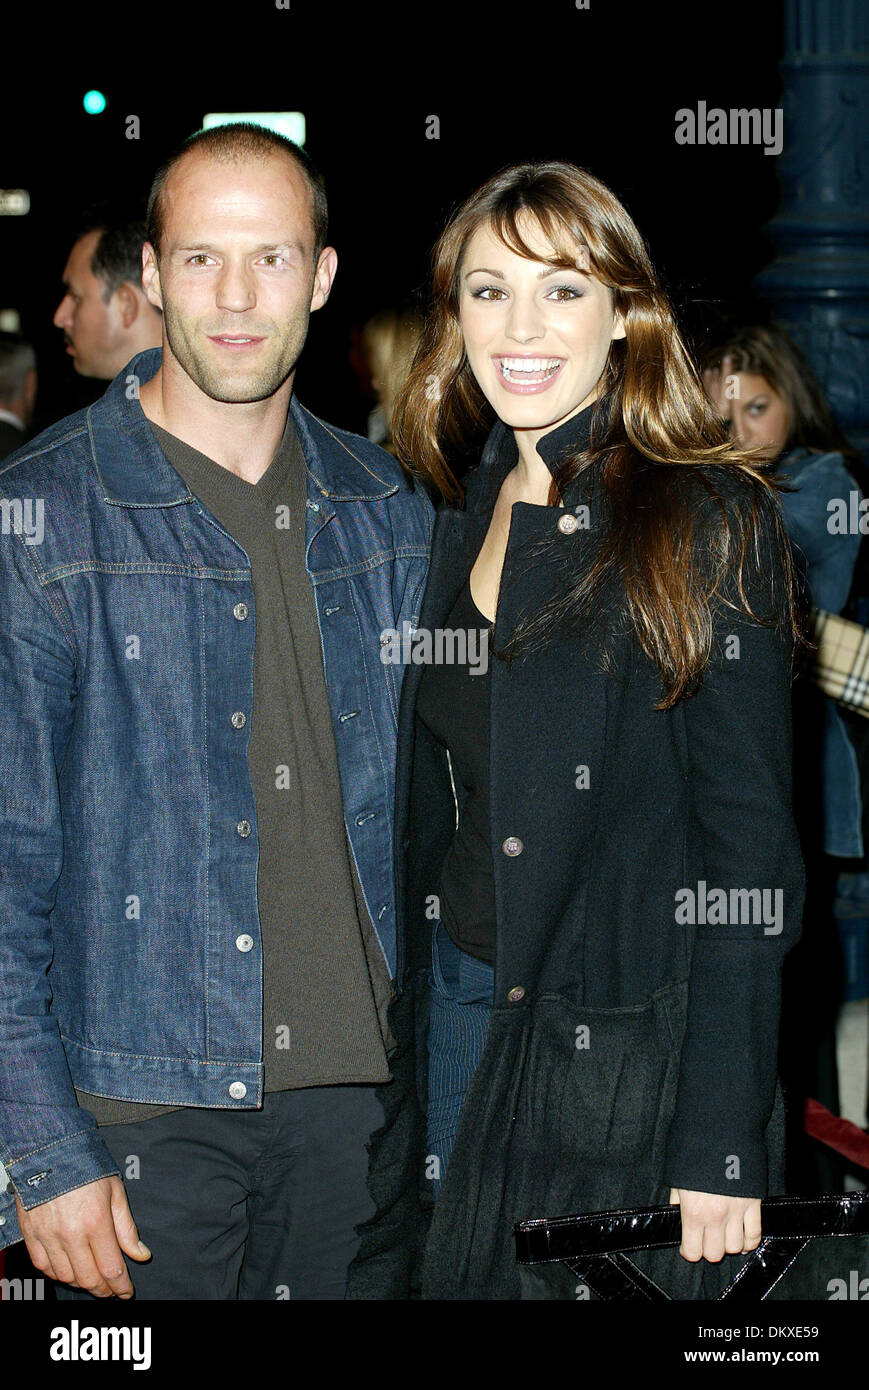 JASON STATHAM & KELLY BROOK.ACTOR & MODEL BEVERLY HILLS, LOS ANGELES,.ACADEMY OF MOTION PICTURE ARTS.16/10/2002.LAC10019. Stock Photo